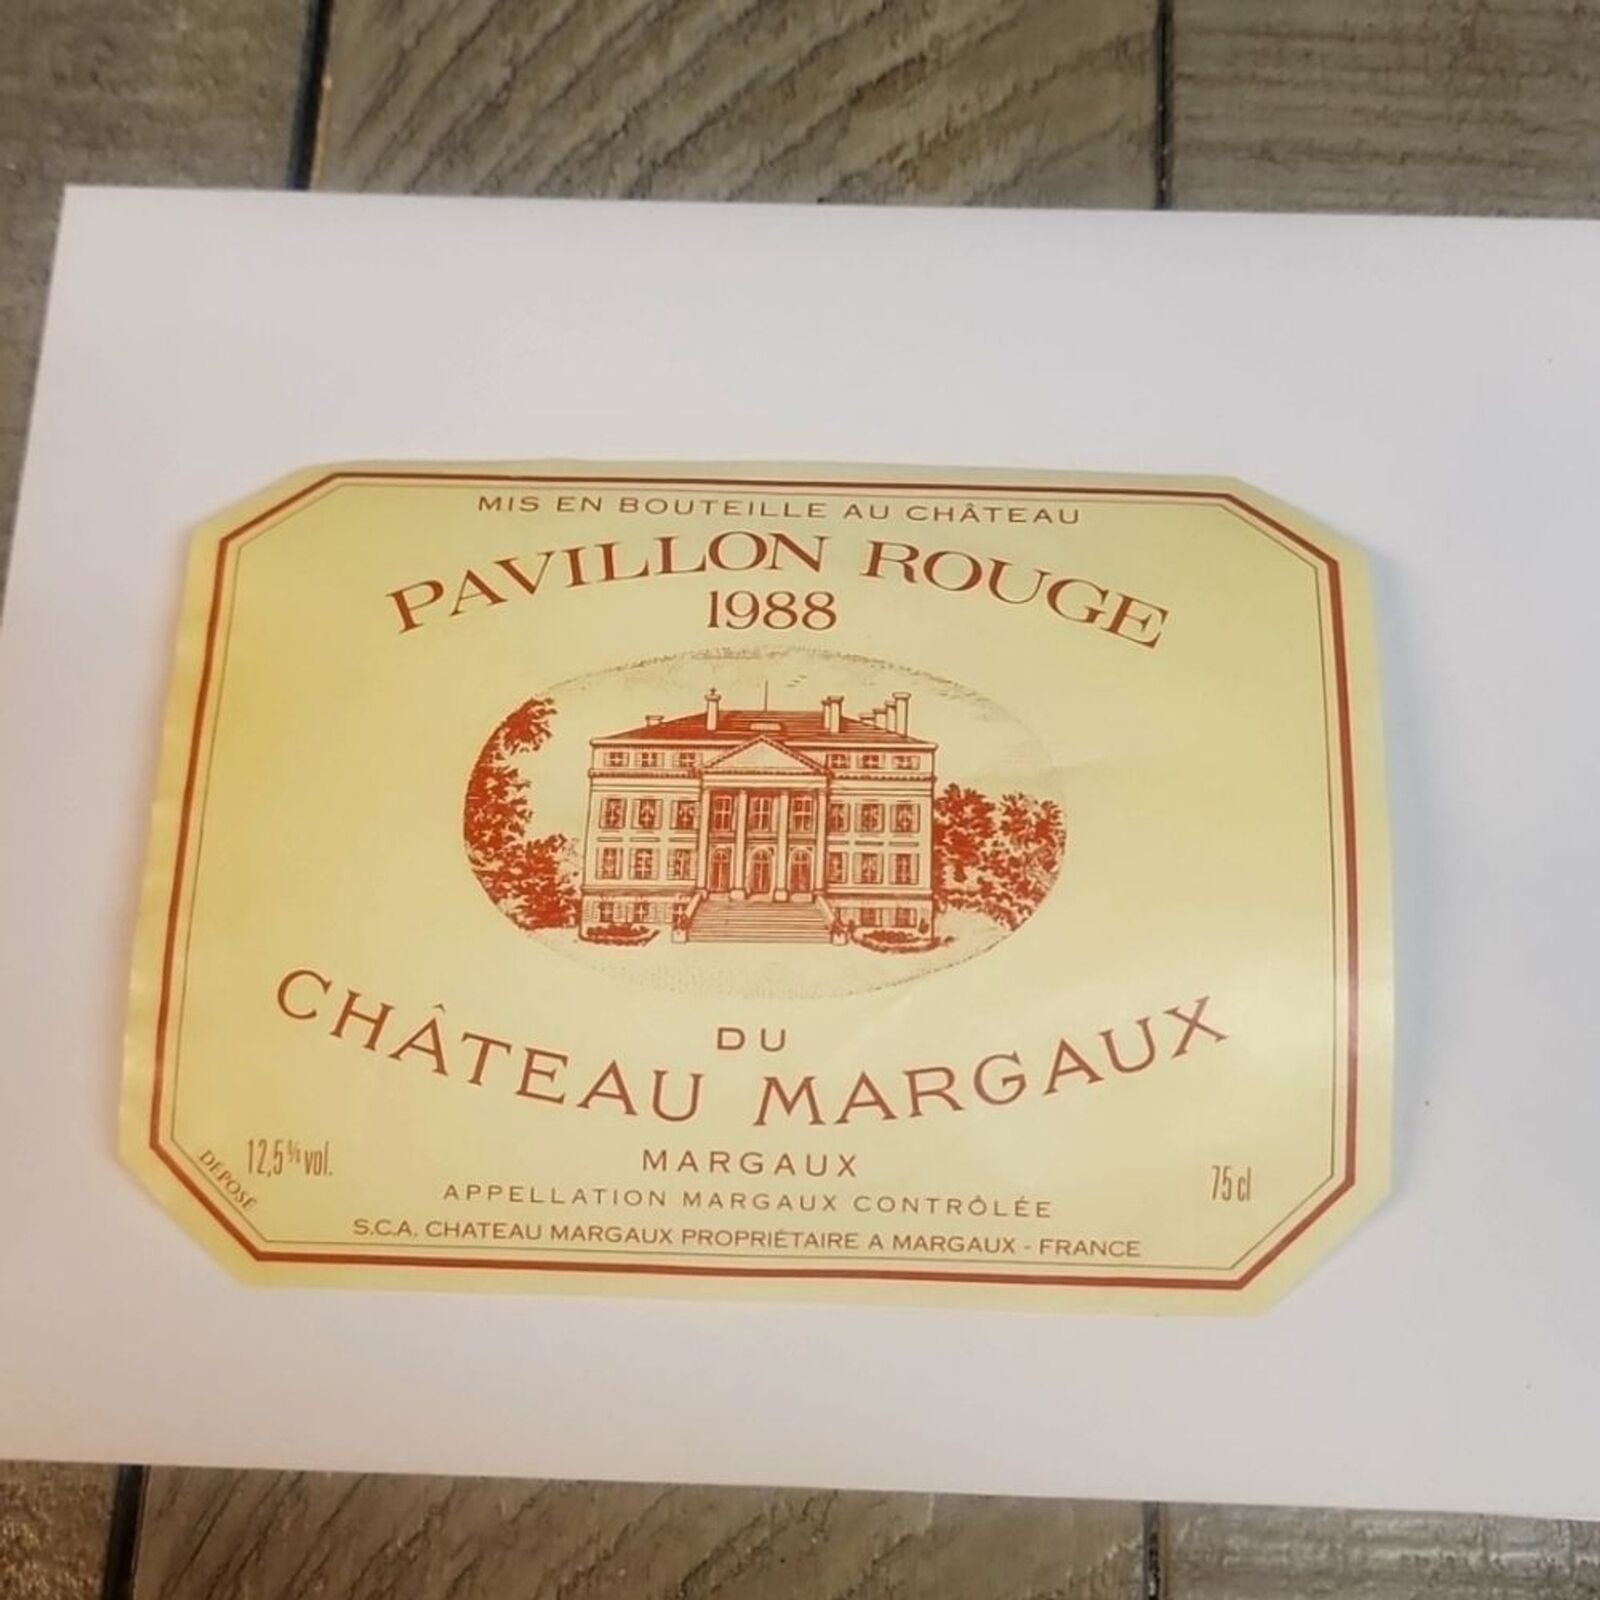 Original WINE LABEL from Chateau Margaux PAVILLON ROUGE 1988